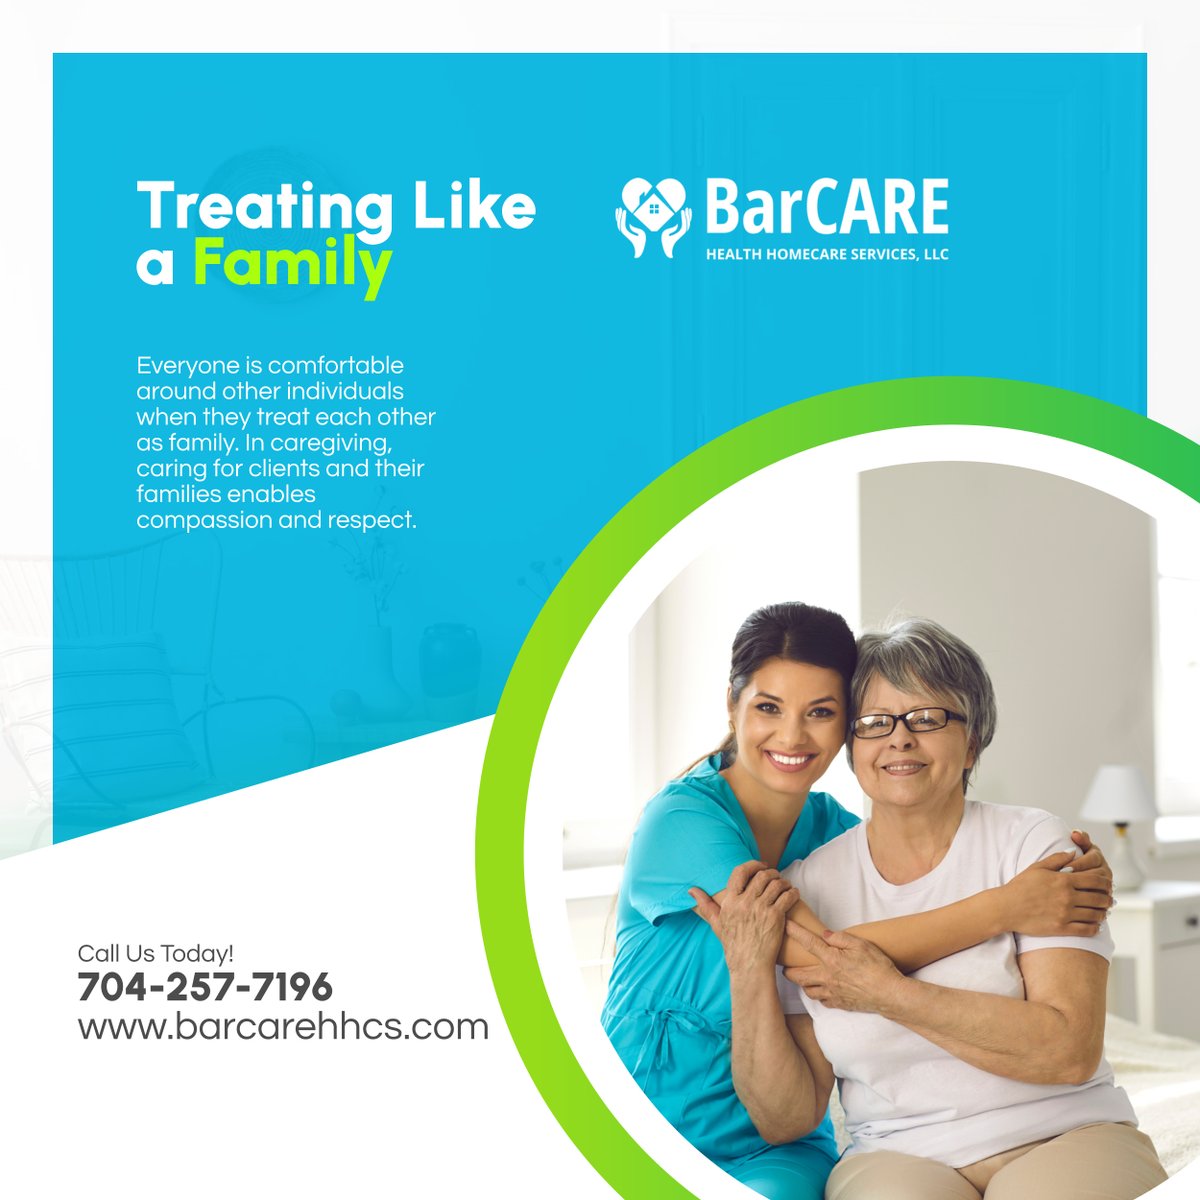 Effective caregiving happens when all parties treat each other as families. If you are looking for a home care provider with the same core value, contact BarCARE Health Homecare Services LLC. 

#HomeCare #LincolntonNC #HomeCareProvider #EffectiveCaregiving